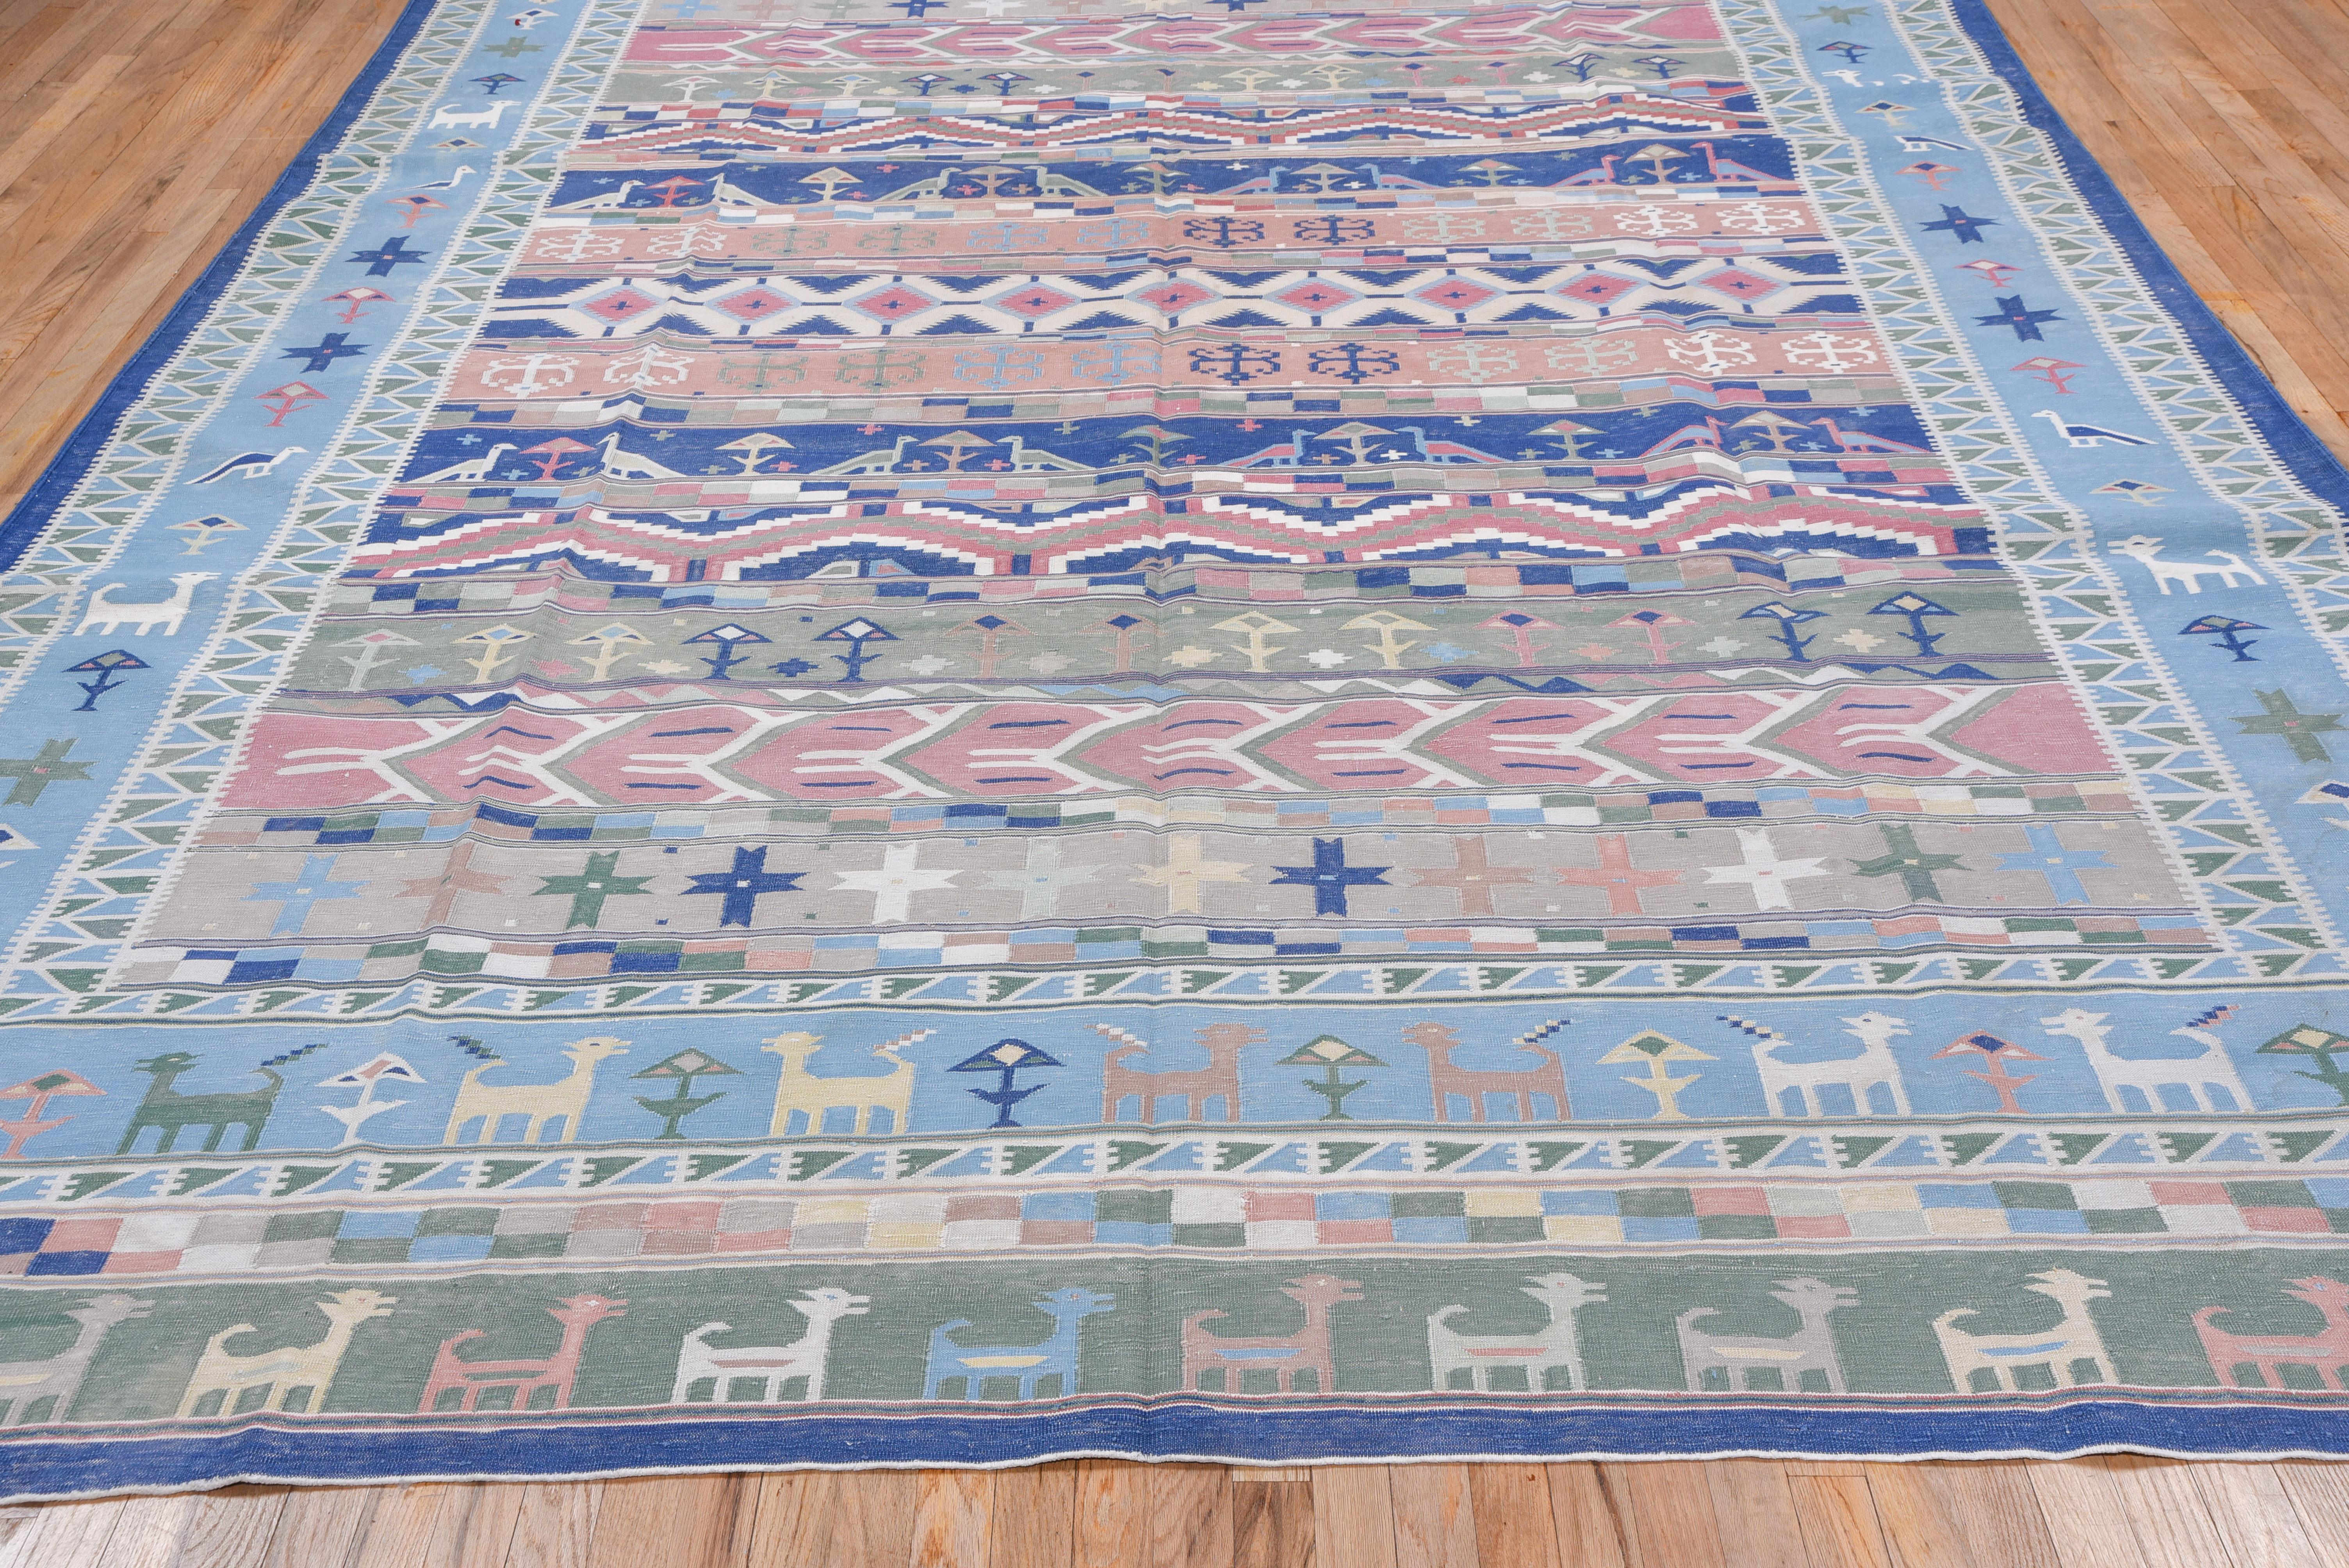 Hand-Woven Colorful Antique Pictorial Art Deco Cotton Dhurrie Rug, Circa 1910s For Sale